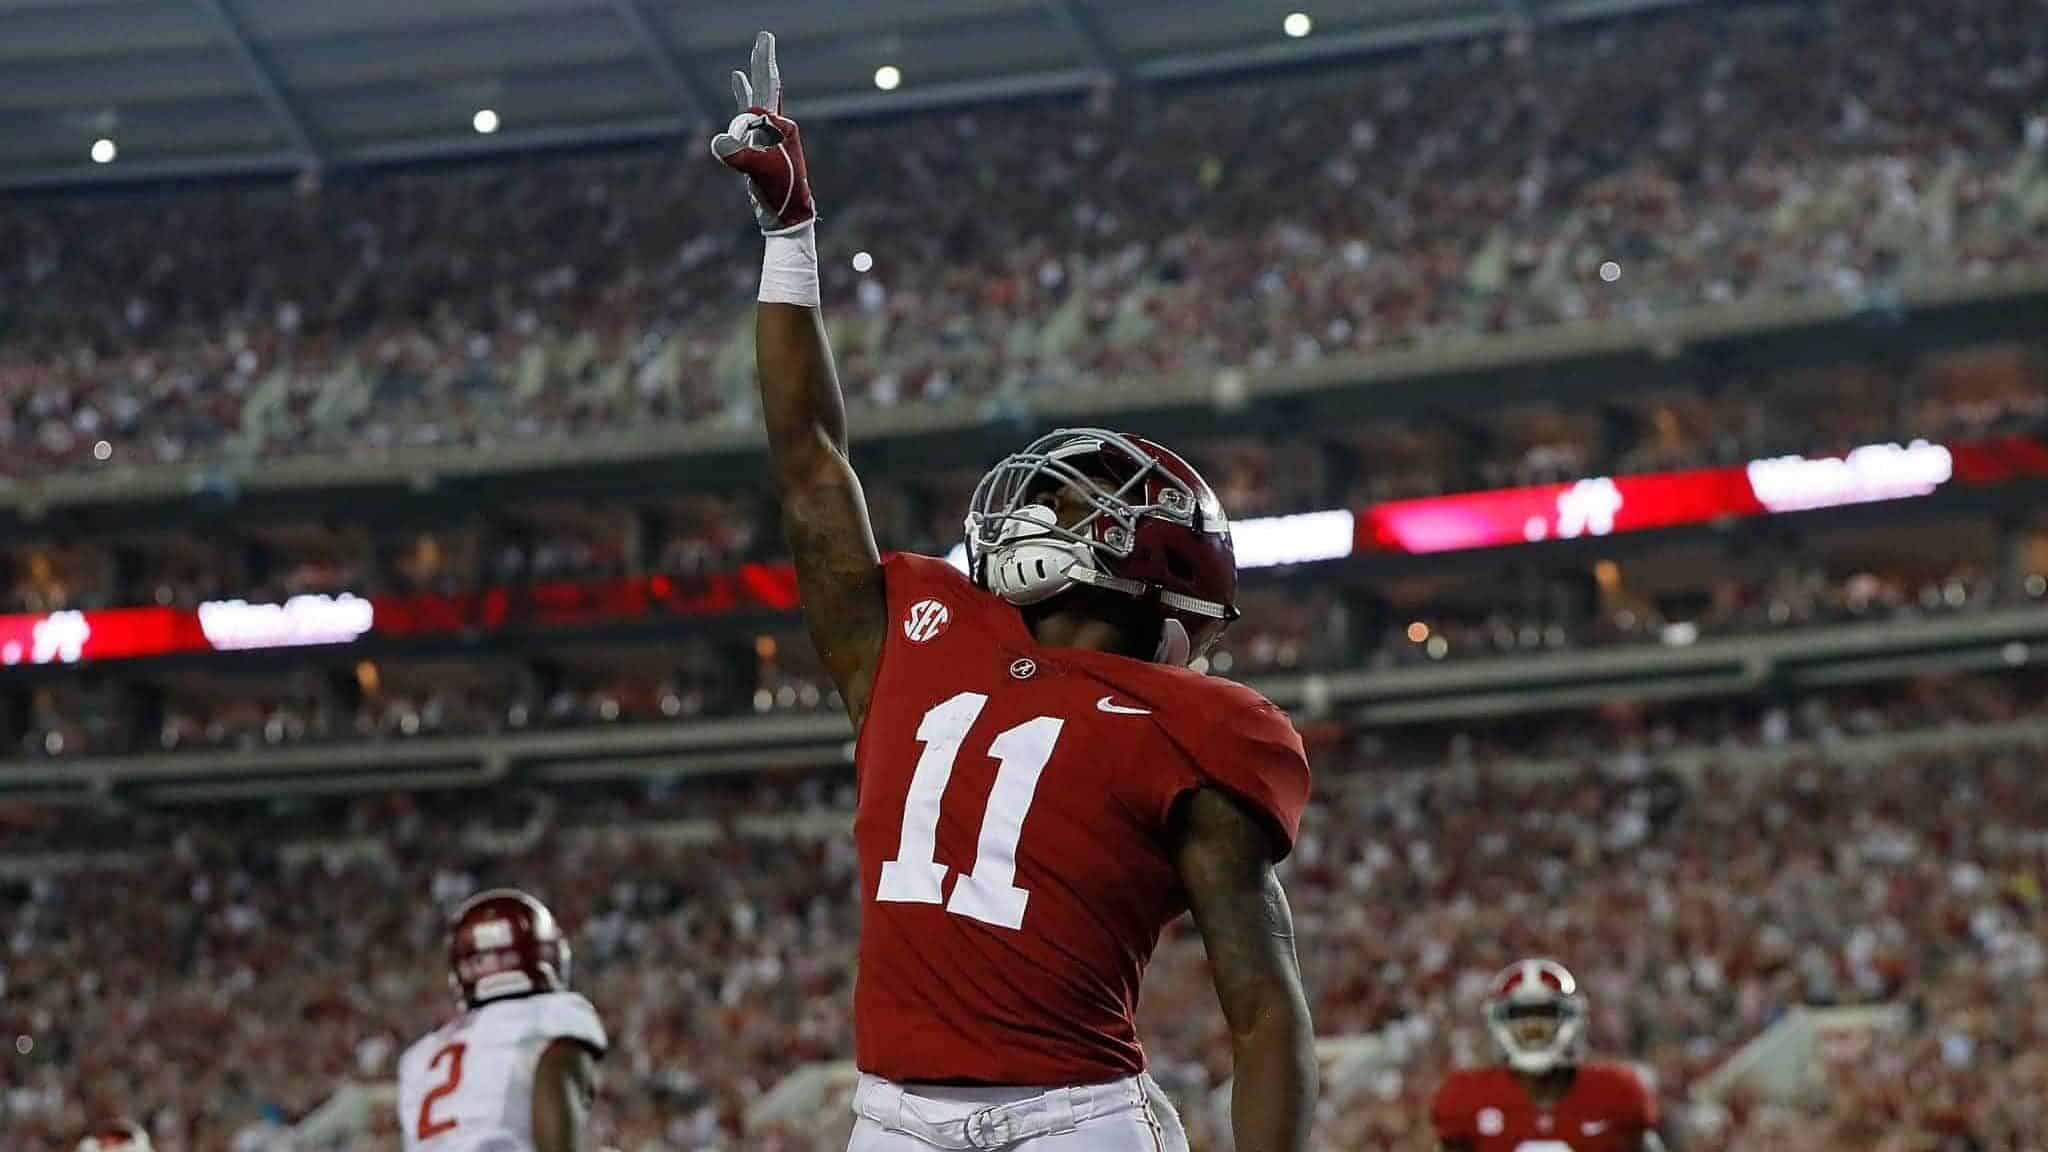 TUSCALOOSA, AL - OCTOBER 14: Henry Ruggs III #11 of the Alabama Crimson Tide reacts after pulling in a touchdown reception against the Arkansas Razorbacks at Bryant-Denny Stadium on October 14, 2017 in Tuscaloosa, Alabama. Potential New York Jets draft pick